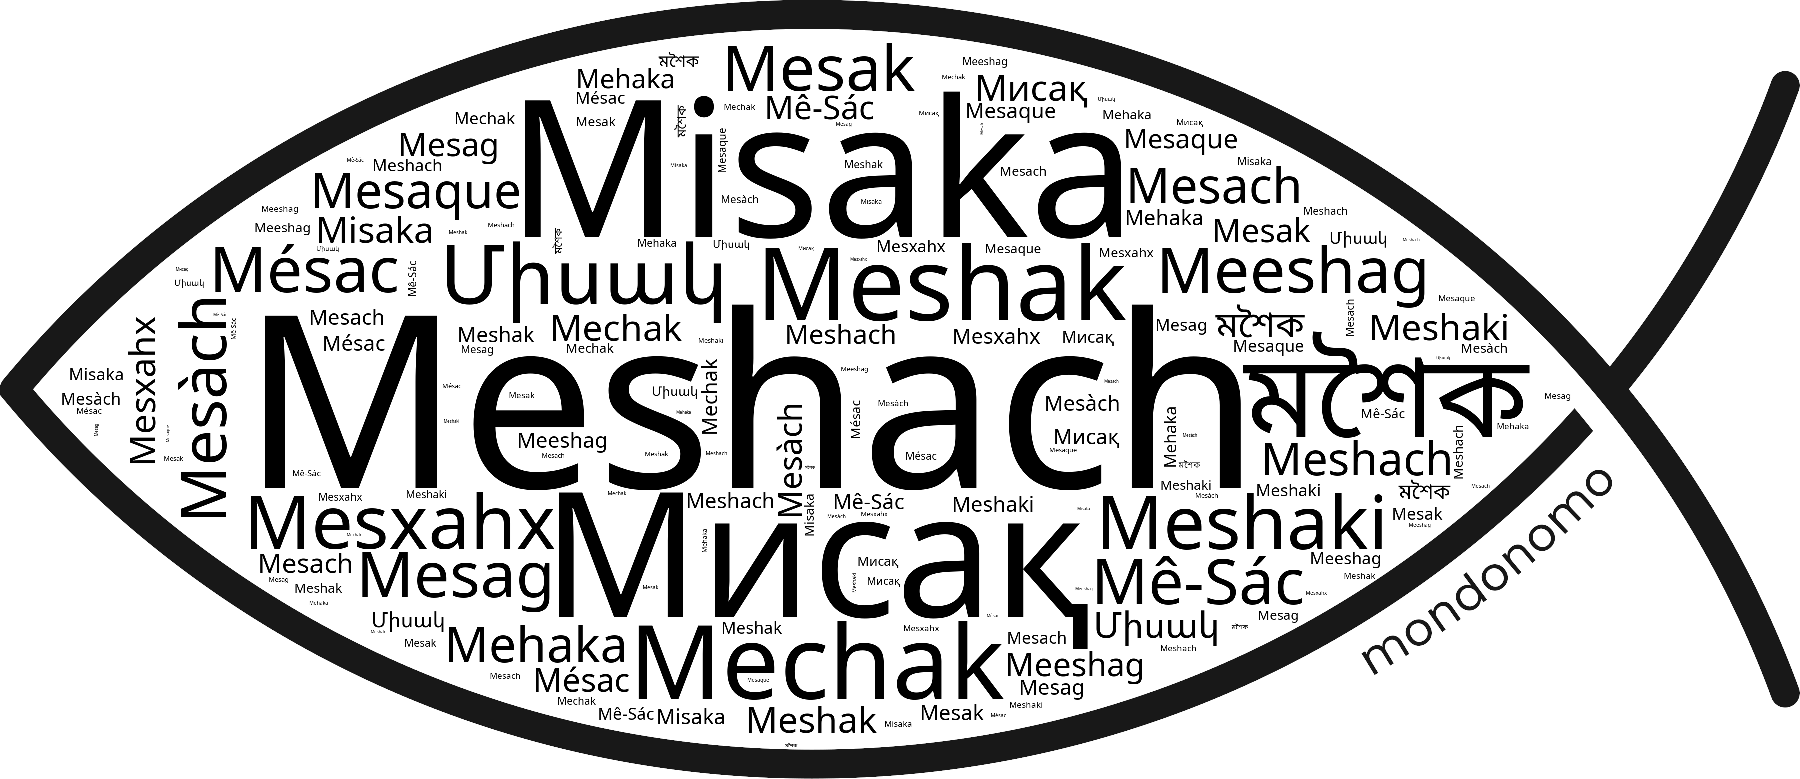 Name Meshach in the world's Bibles